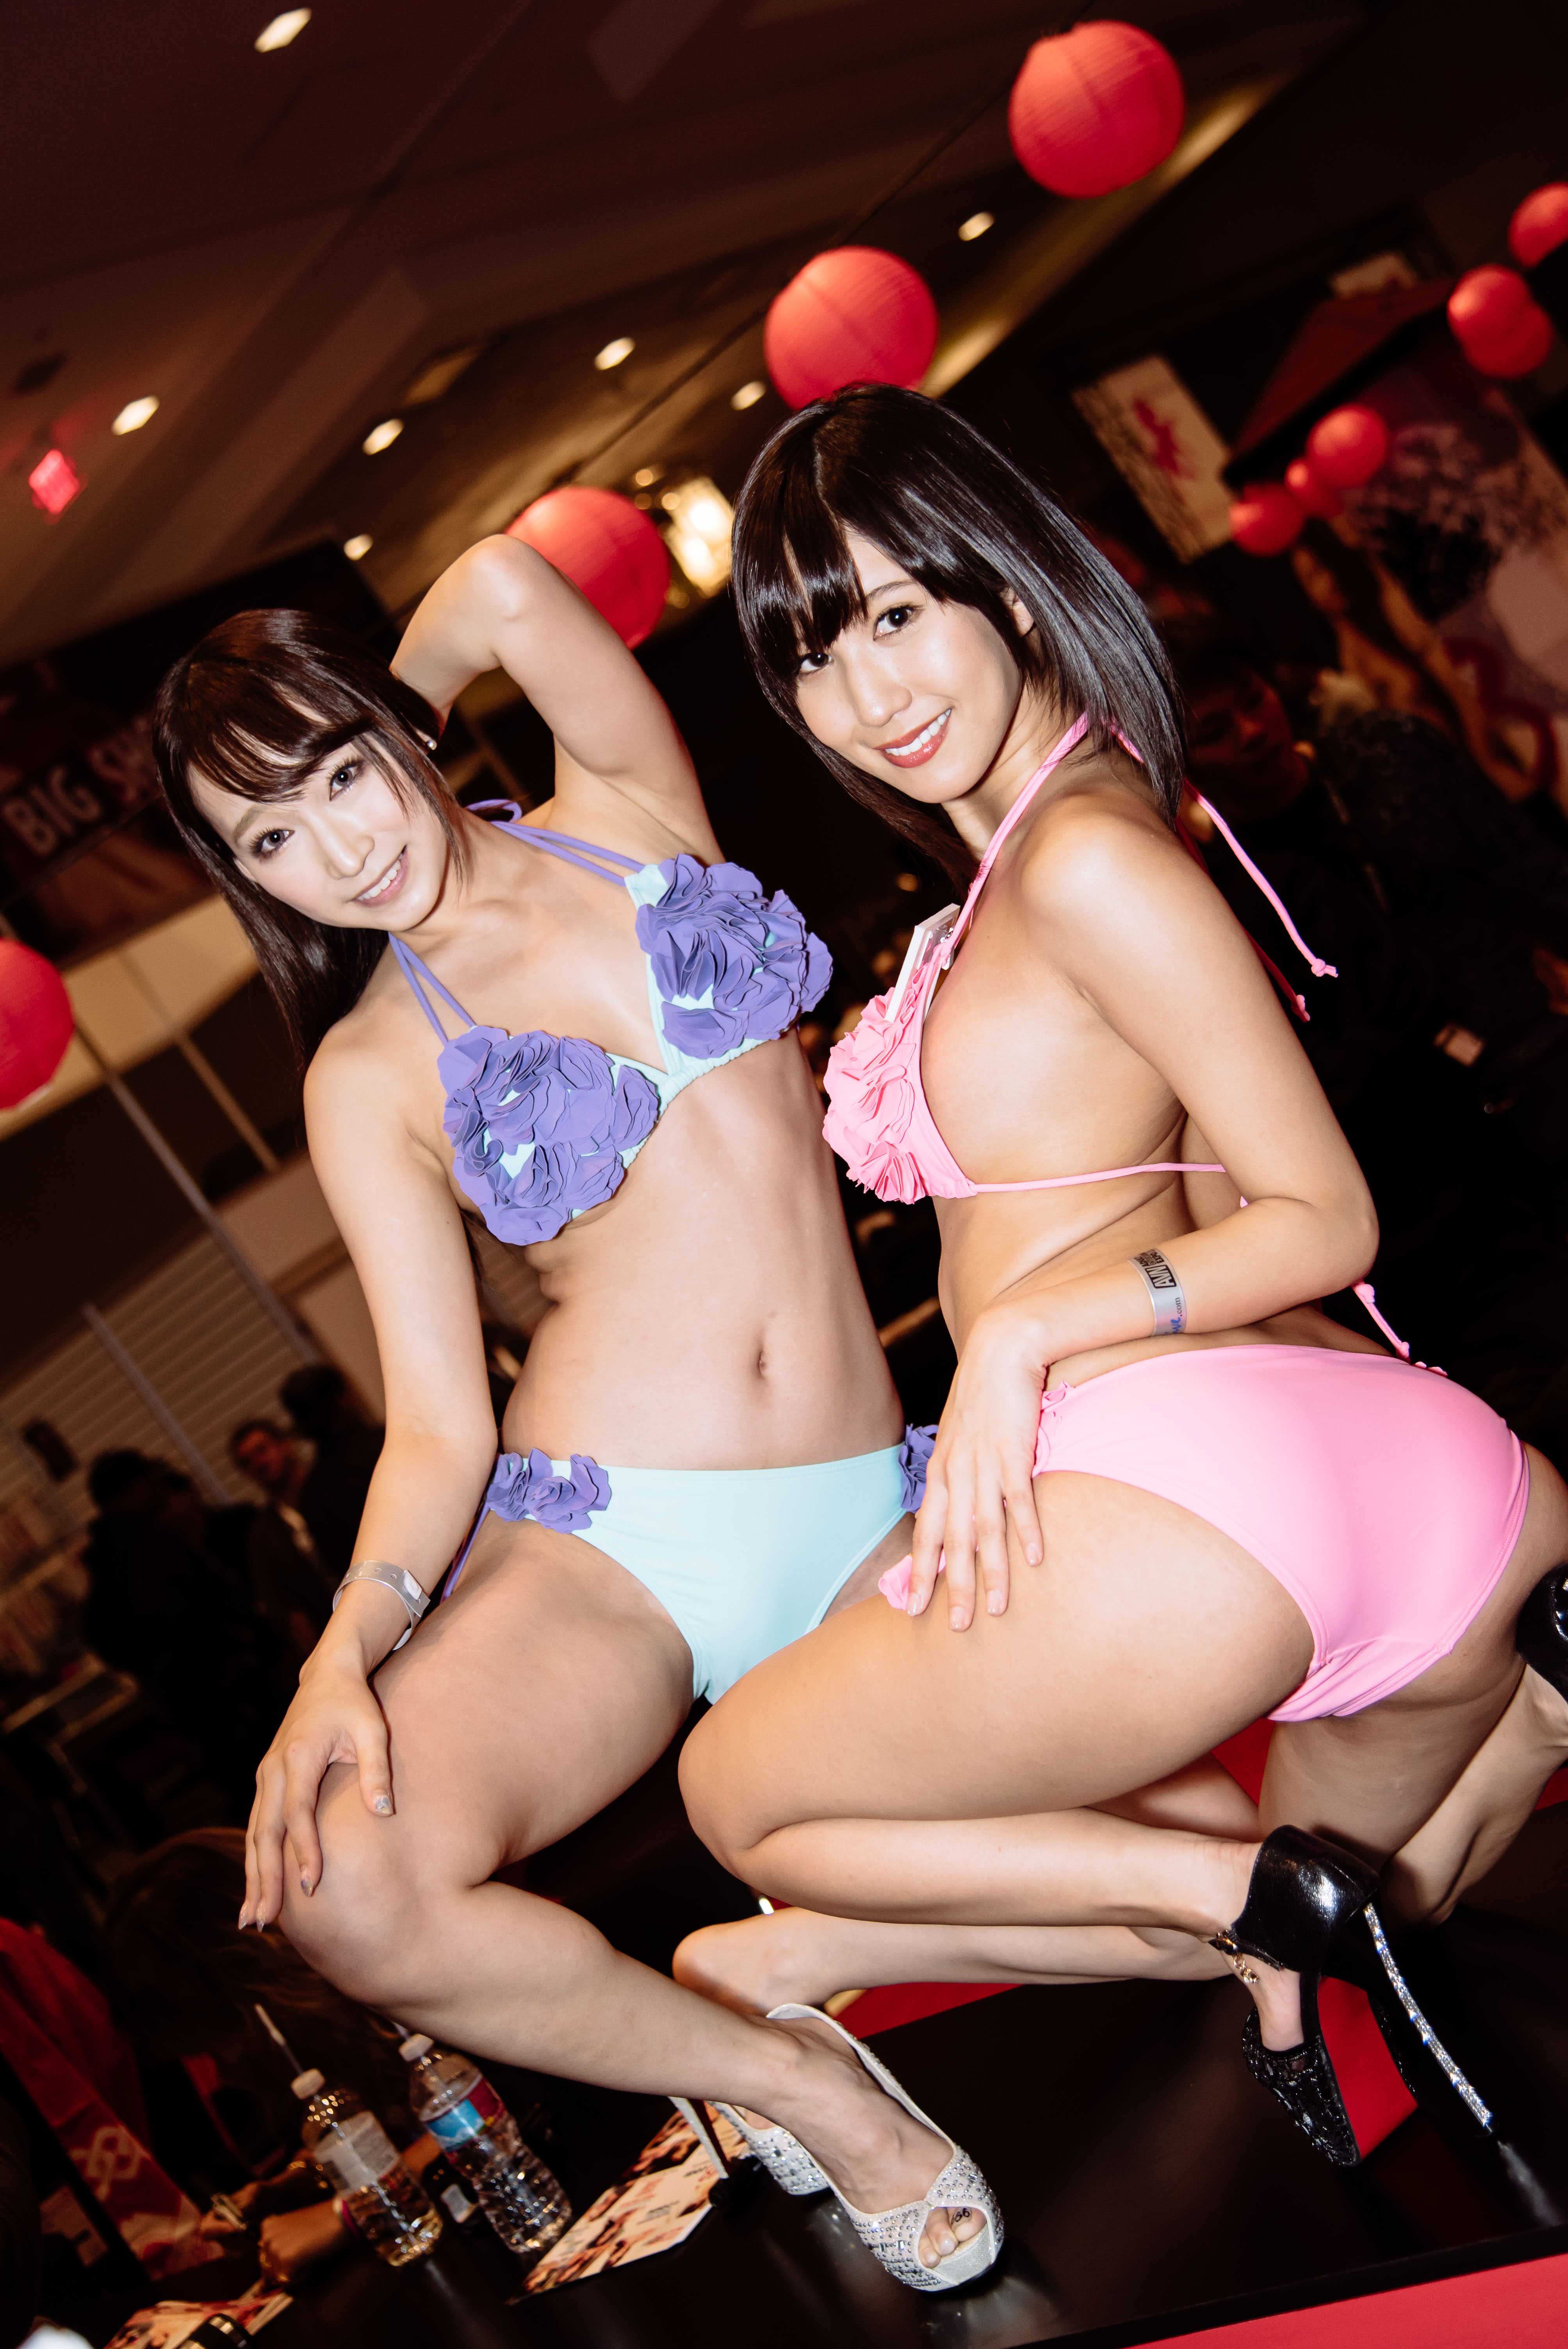 We Visit The World's Largest Adult Expo The AVN Awards Amped Asia